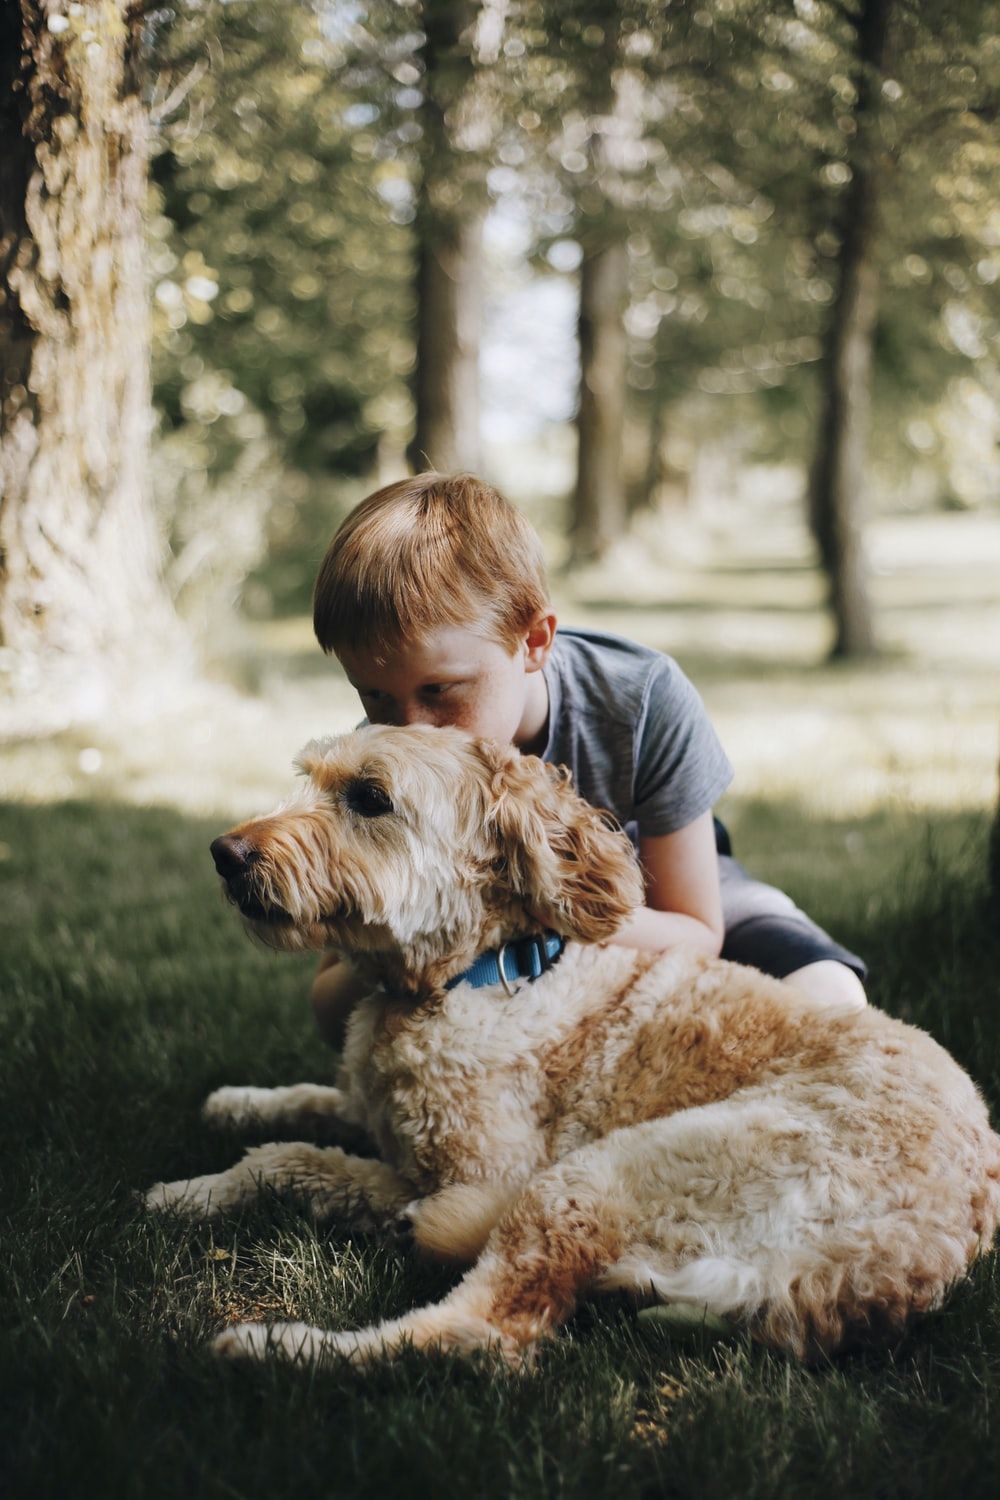 Boy And Dog Picture. Download Free Image